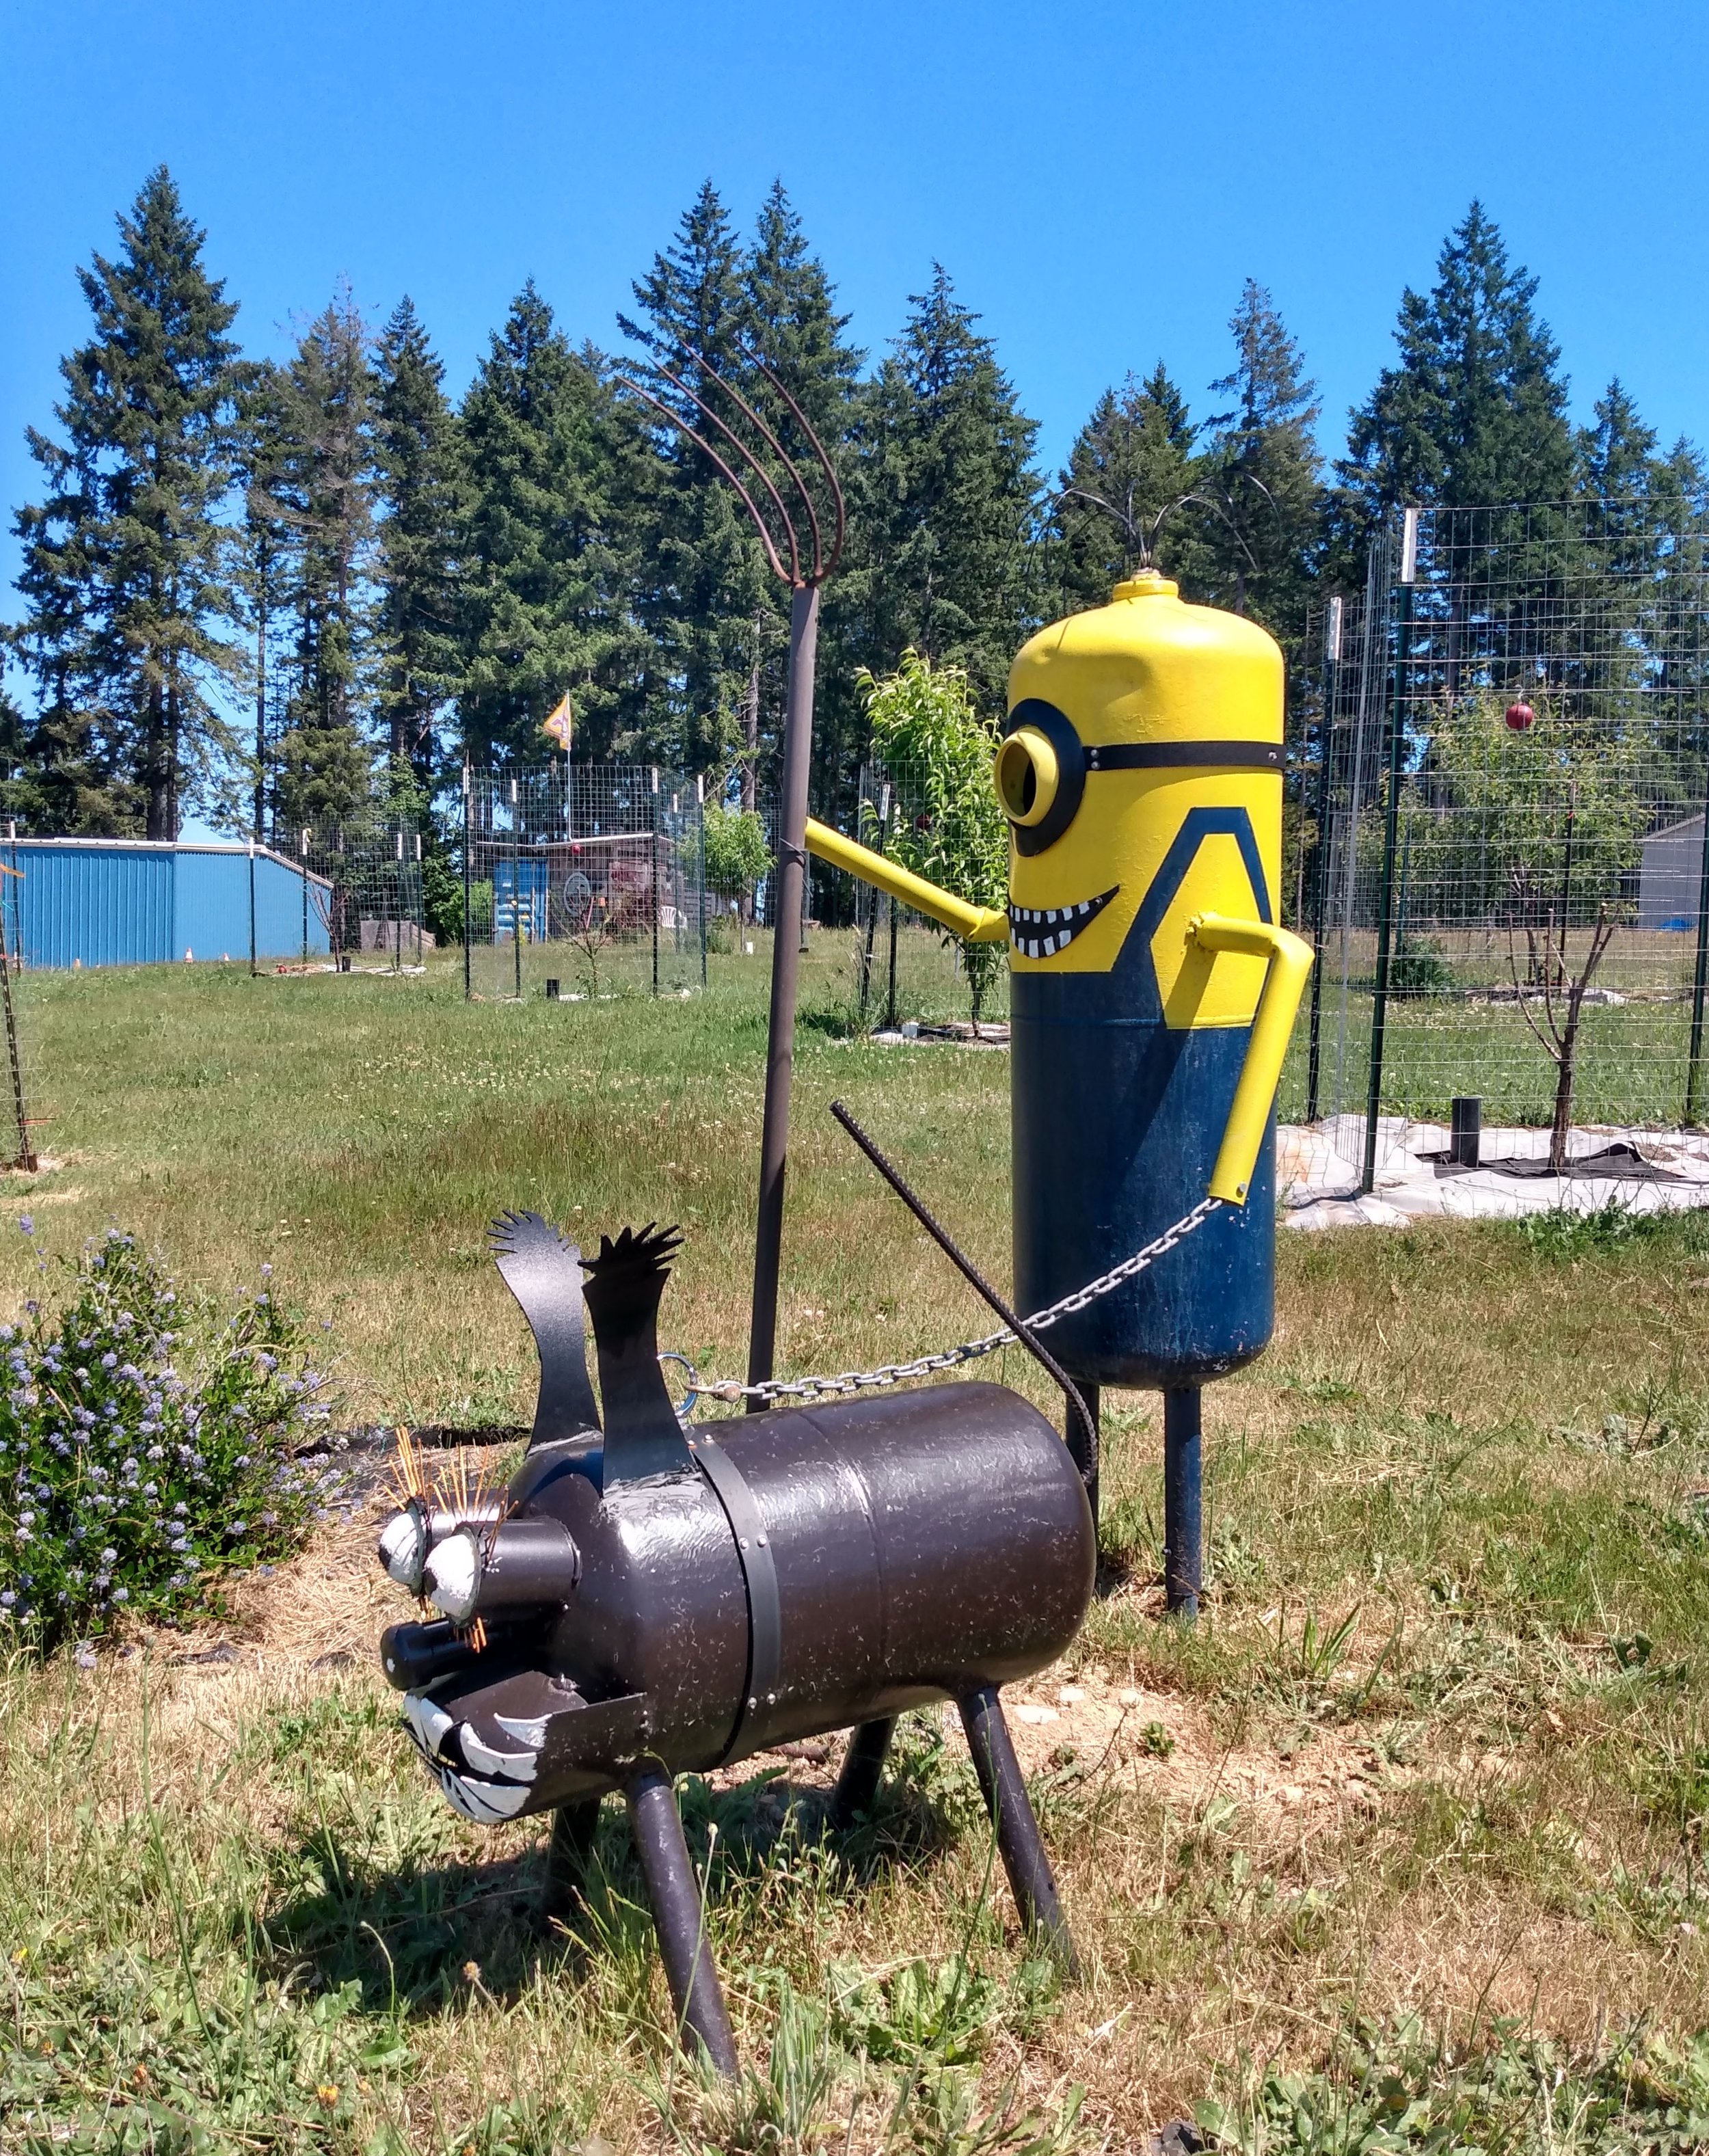  Good Minion representation in the area as well. Their simple shape lets people turn all sorts of random trash into minion lawn decorations. 